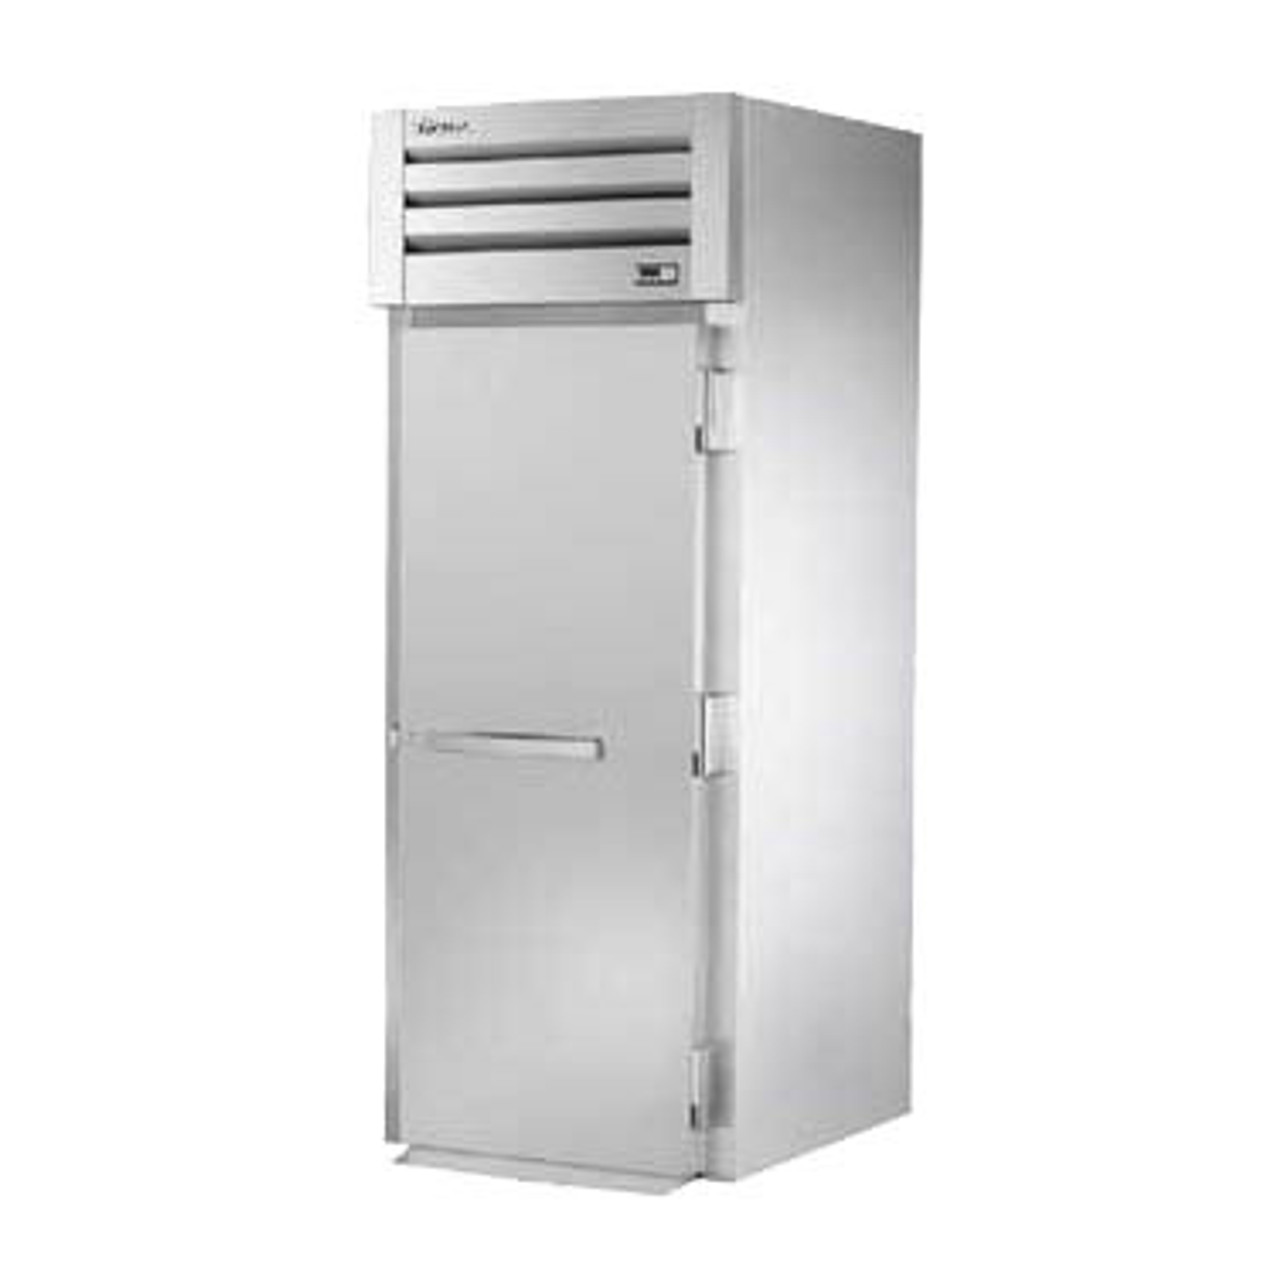 True Manufacturing STG1RRI-1S Spec Series 1 Section Roll In Refrigerator with Solid Door - Aluminum Sides & Interior